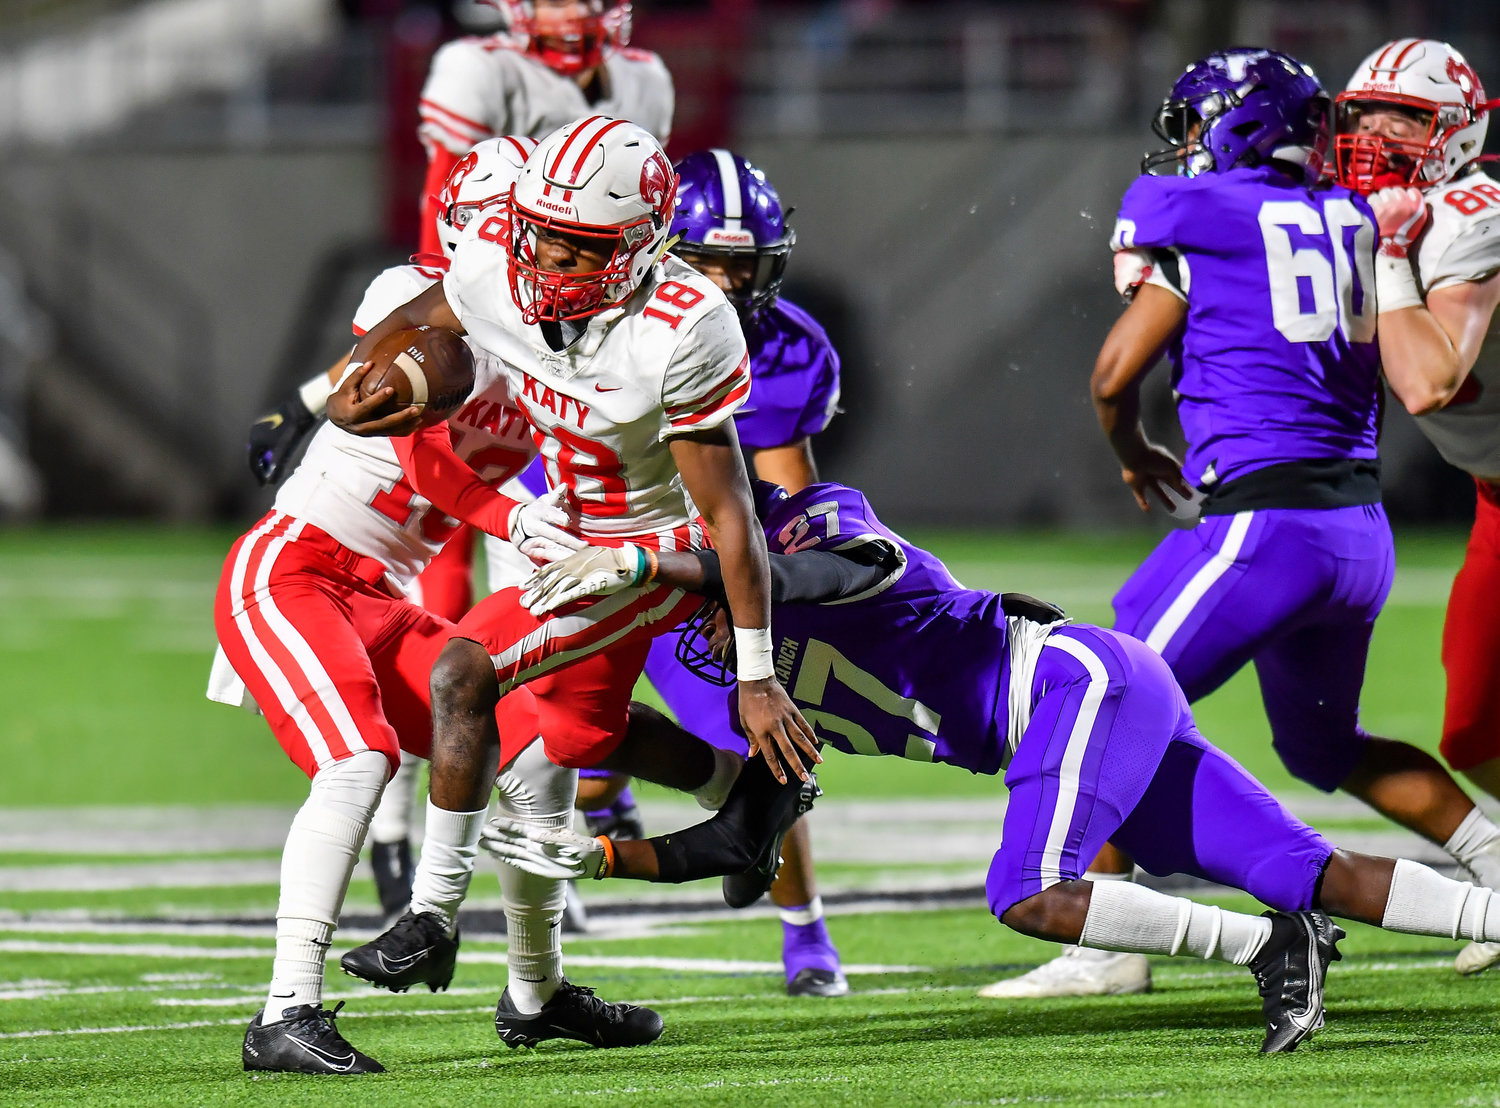 Katy, Tx. Nov 5, 2021: Katy's Dallas Glass #18 rushes up the middle during a conference game between Katy and Morton Ranch at Legacy in Katy. (Photo by Mark Goodman / Katy Times)